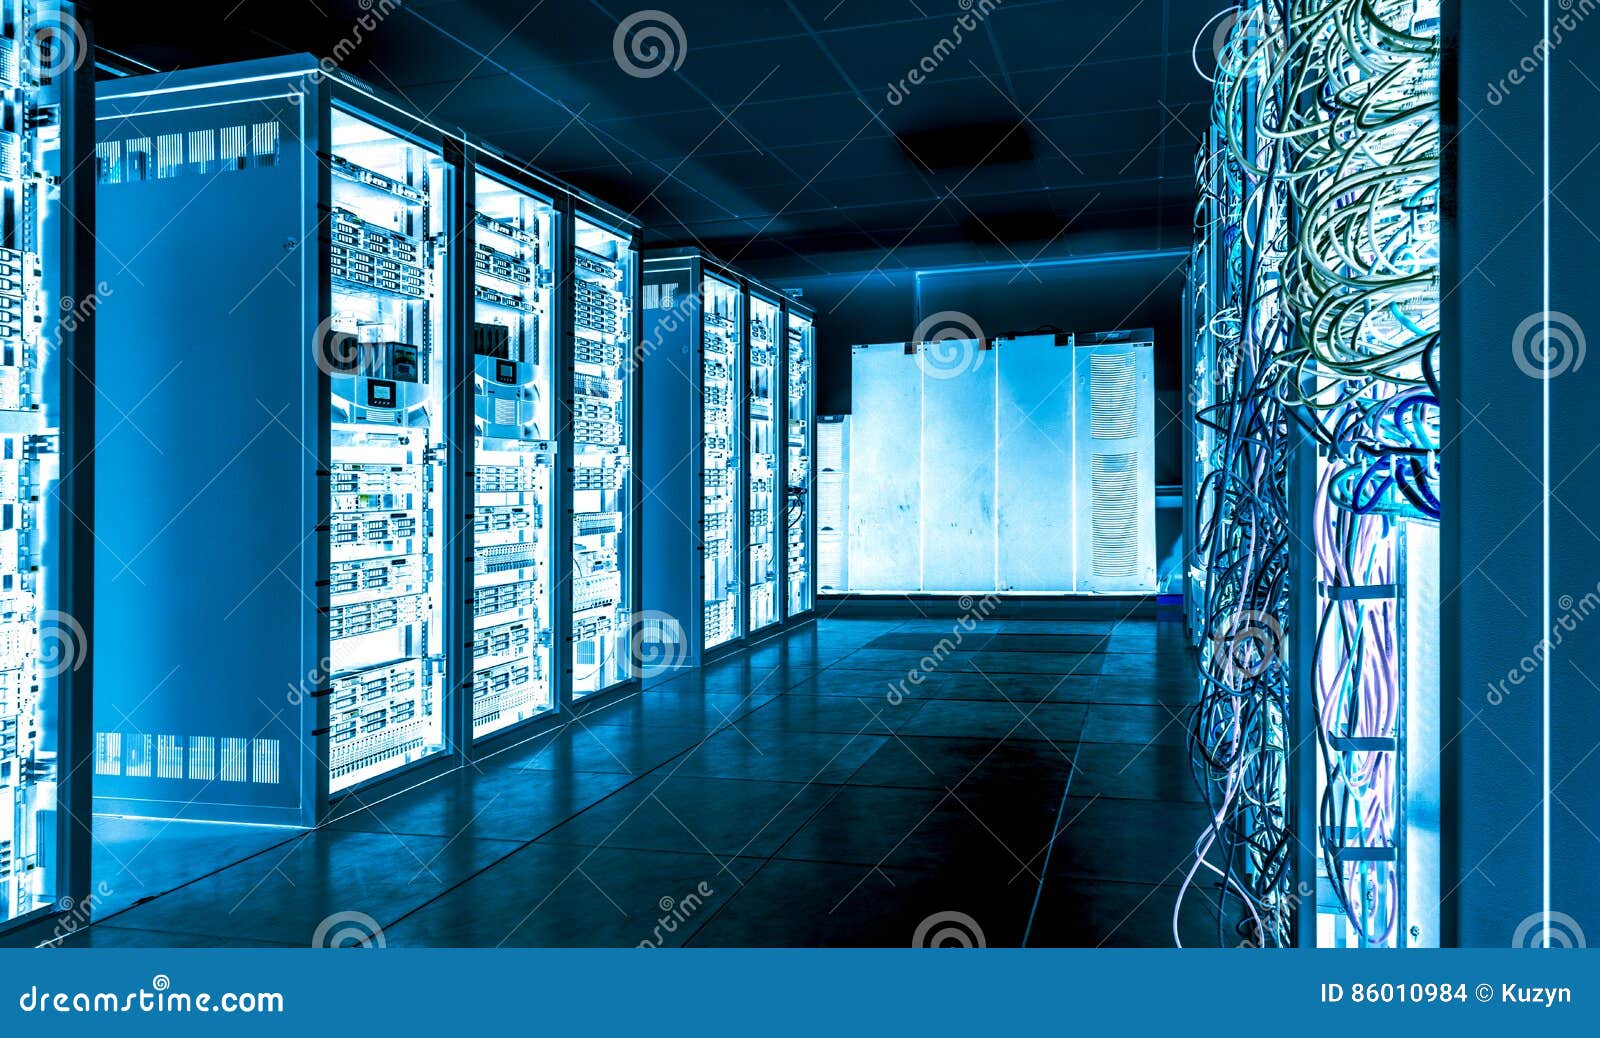 big datacenter with connected servers and internet cables